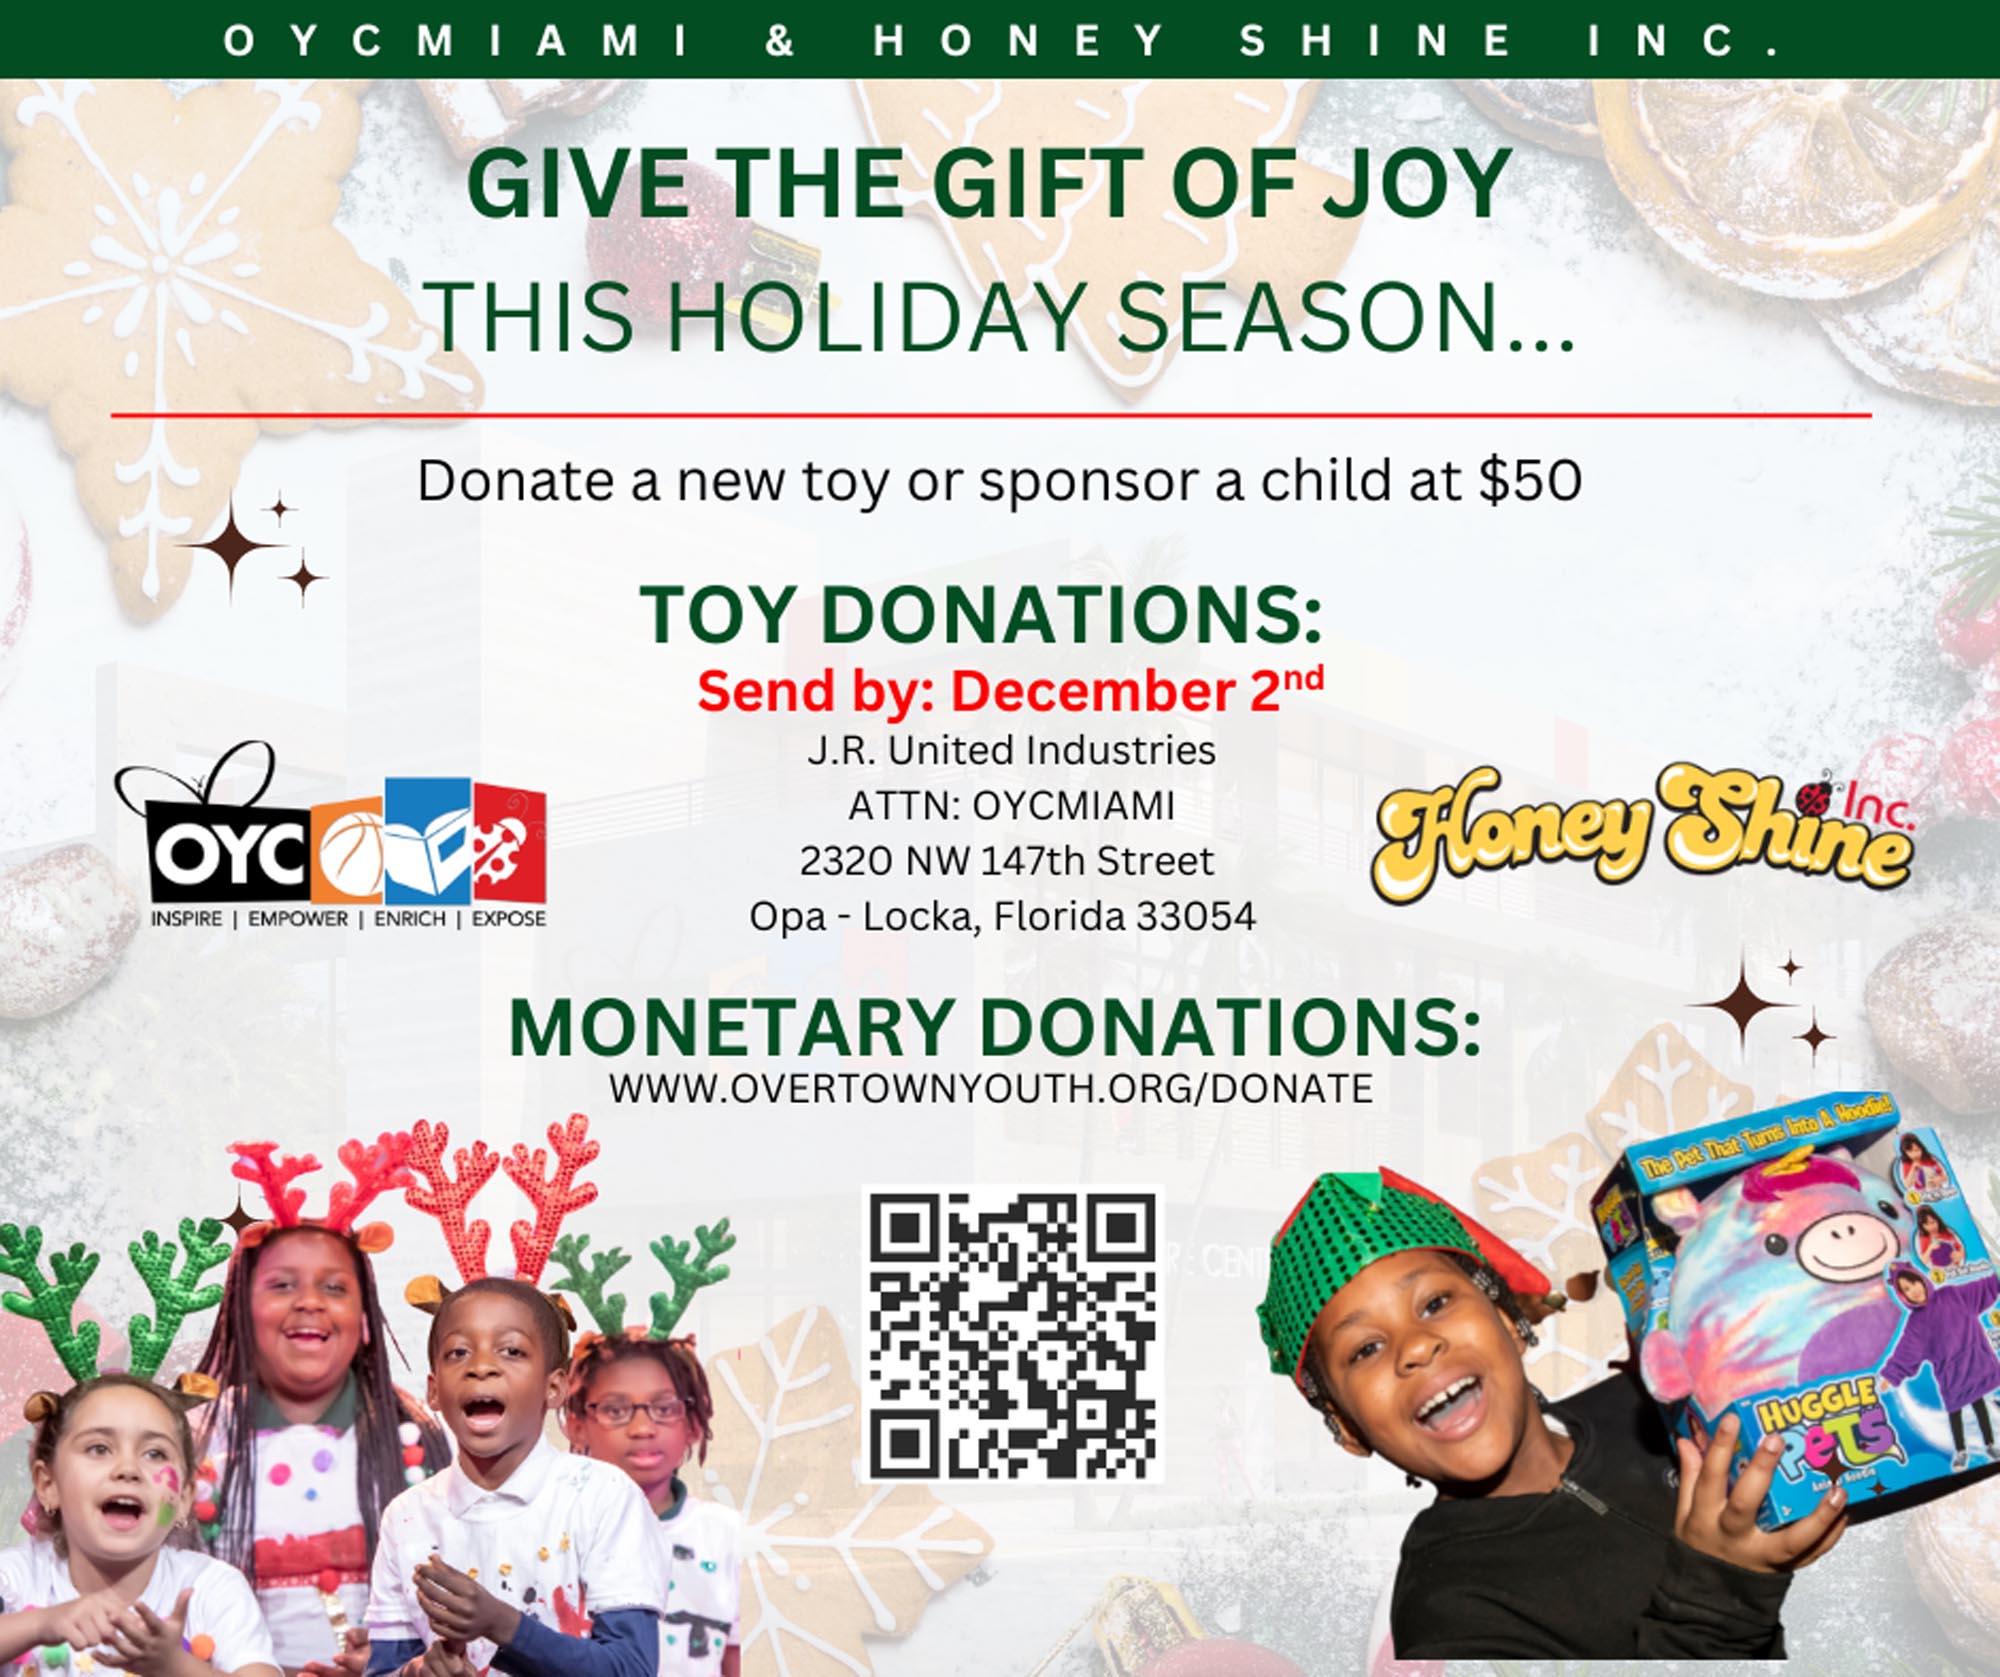 Give the gift of joy this holiday season - Donate a toy to OYC